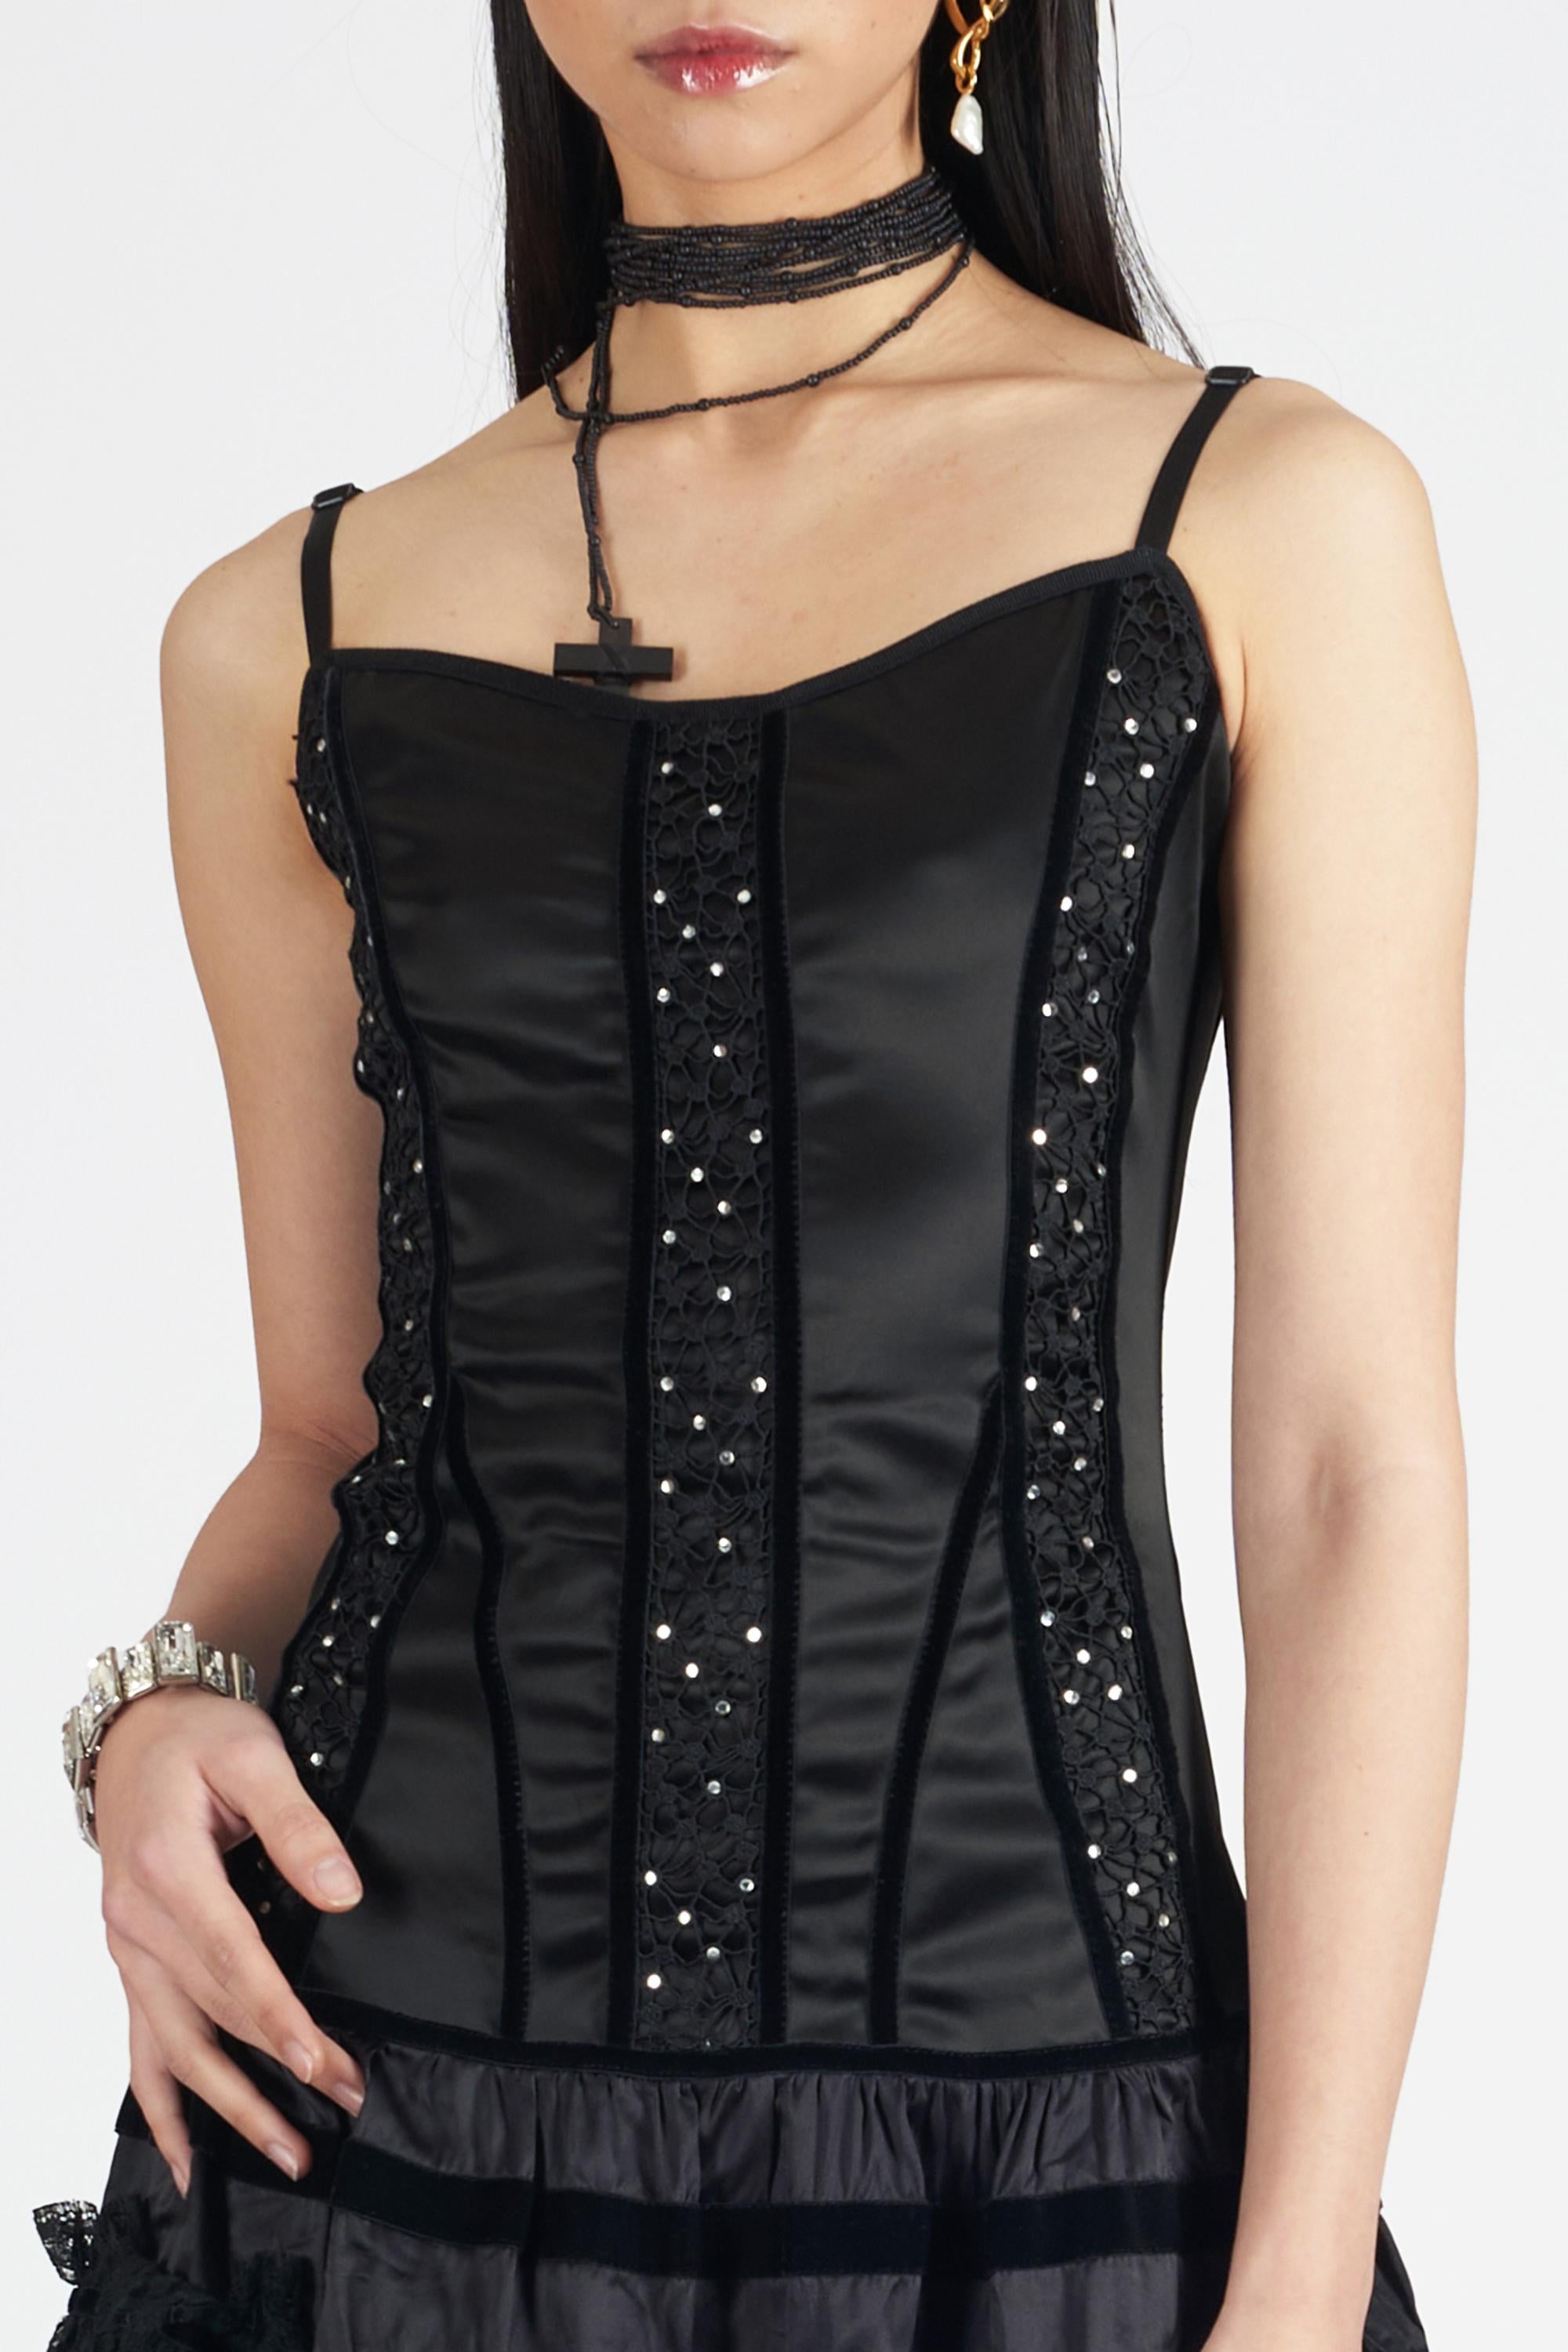 Roccobarocco Vintage 2000’s Diamonte Corset Dress In Excellent Condition For Sale In London, GB